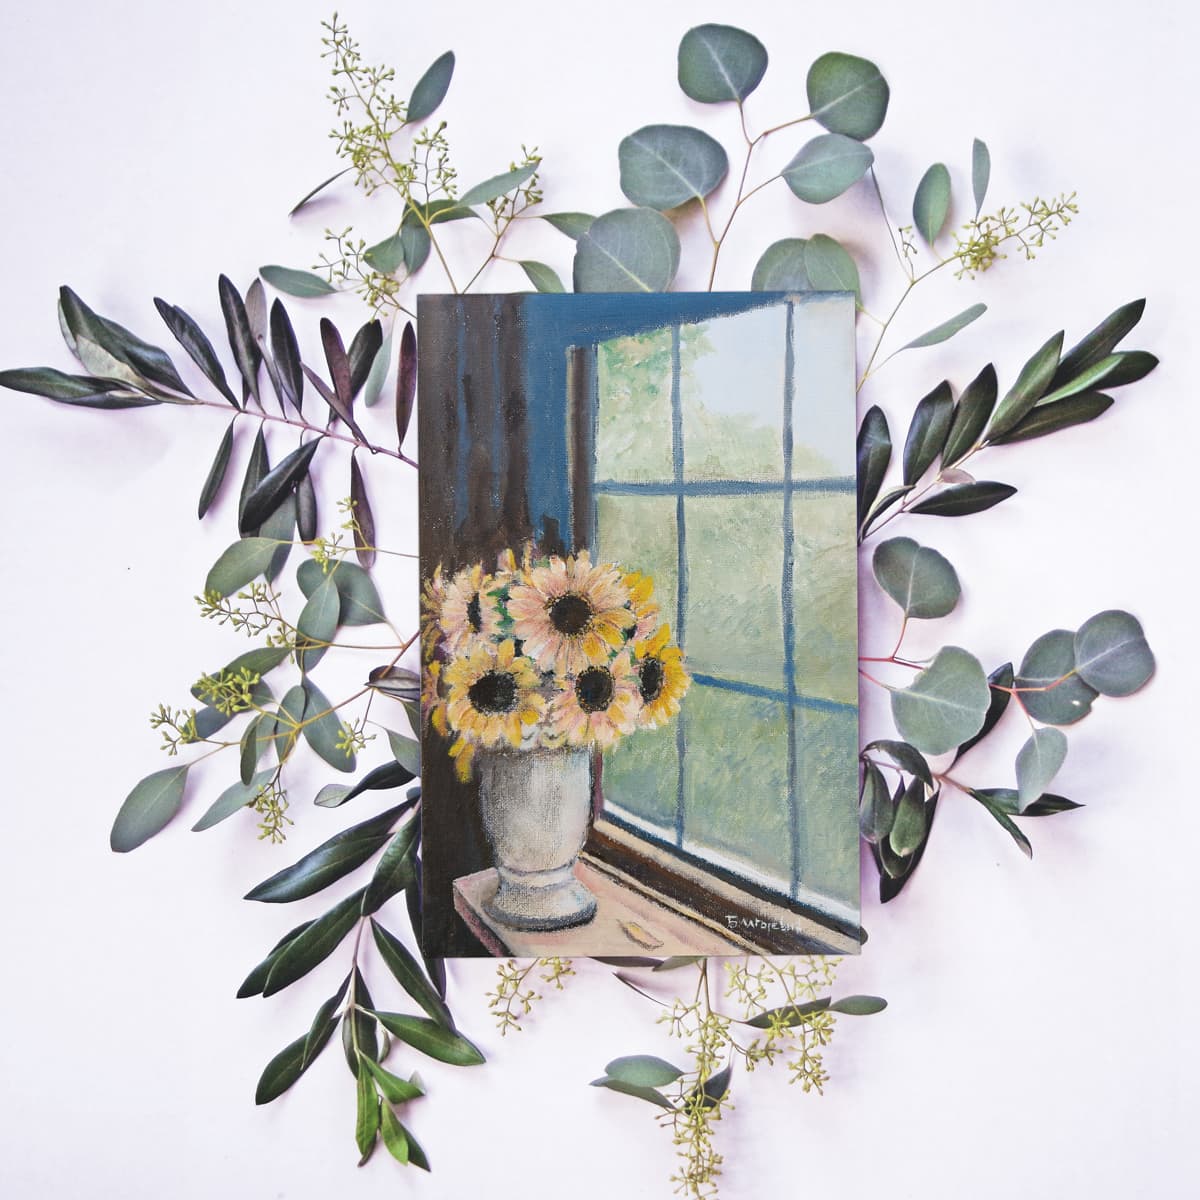 A greeting card with a sunflowers painting laid against the eucalyptus branches announces the greeting card product category.